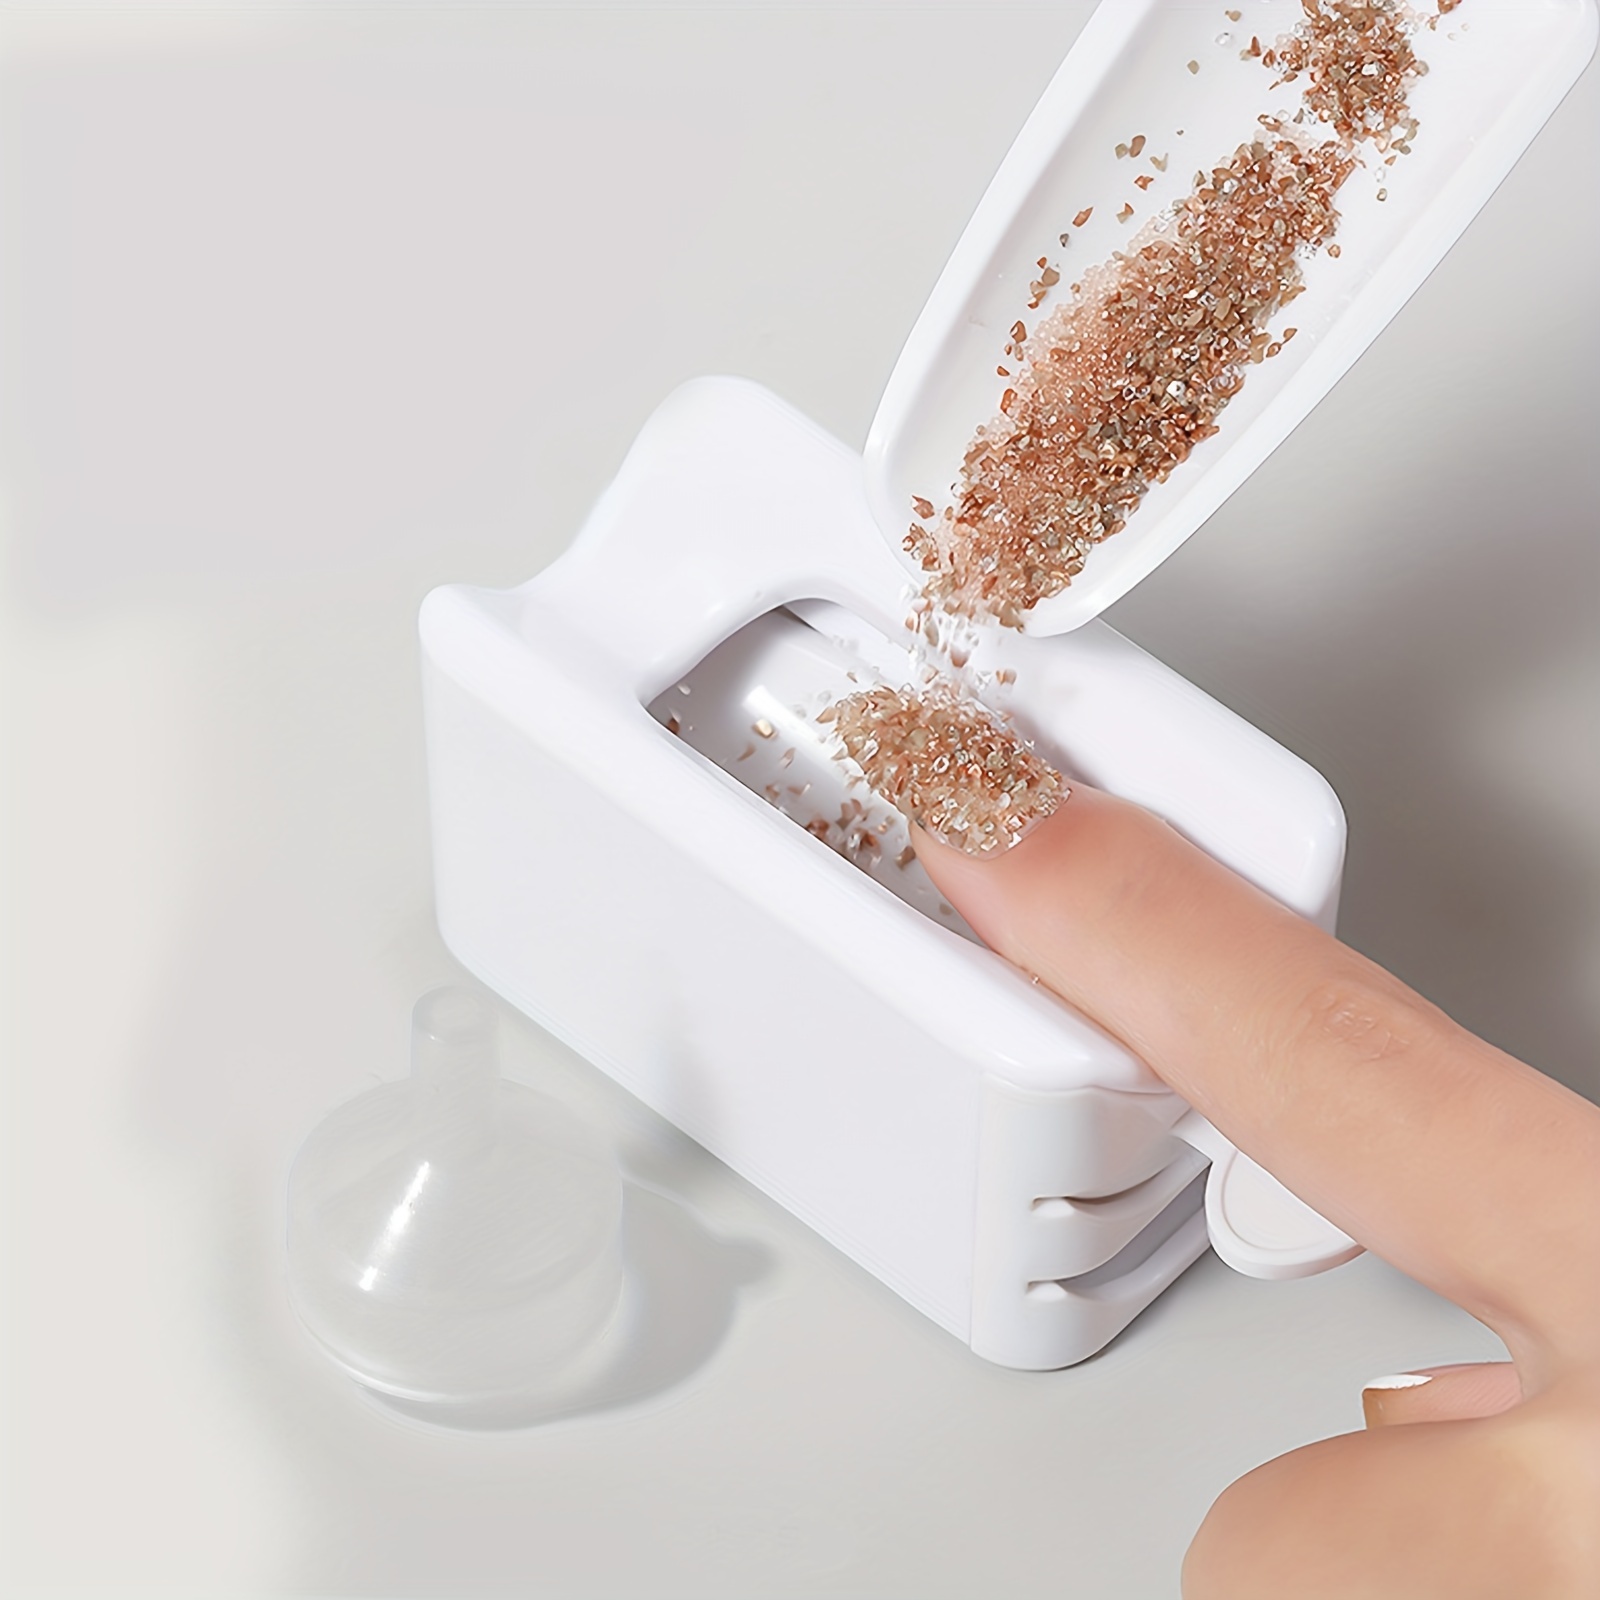 Nail Art Dip Powder Recycling Container Double Layer Nail Dip Powder  Sequins Glitter Recycling Tool Portable Dipping Powder Storage Box